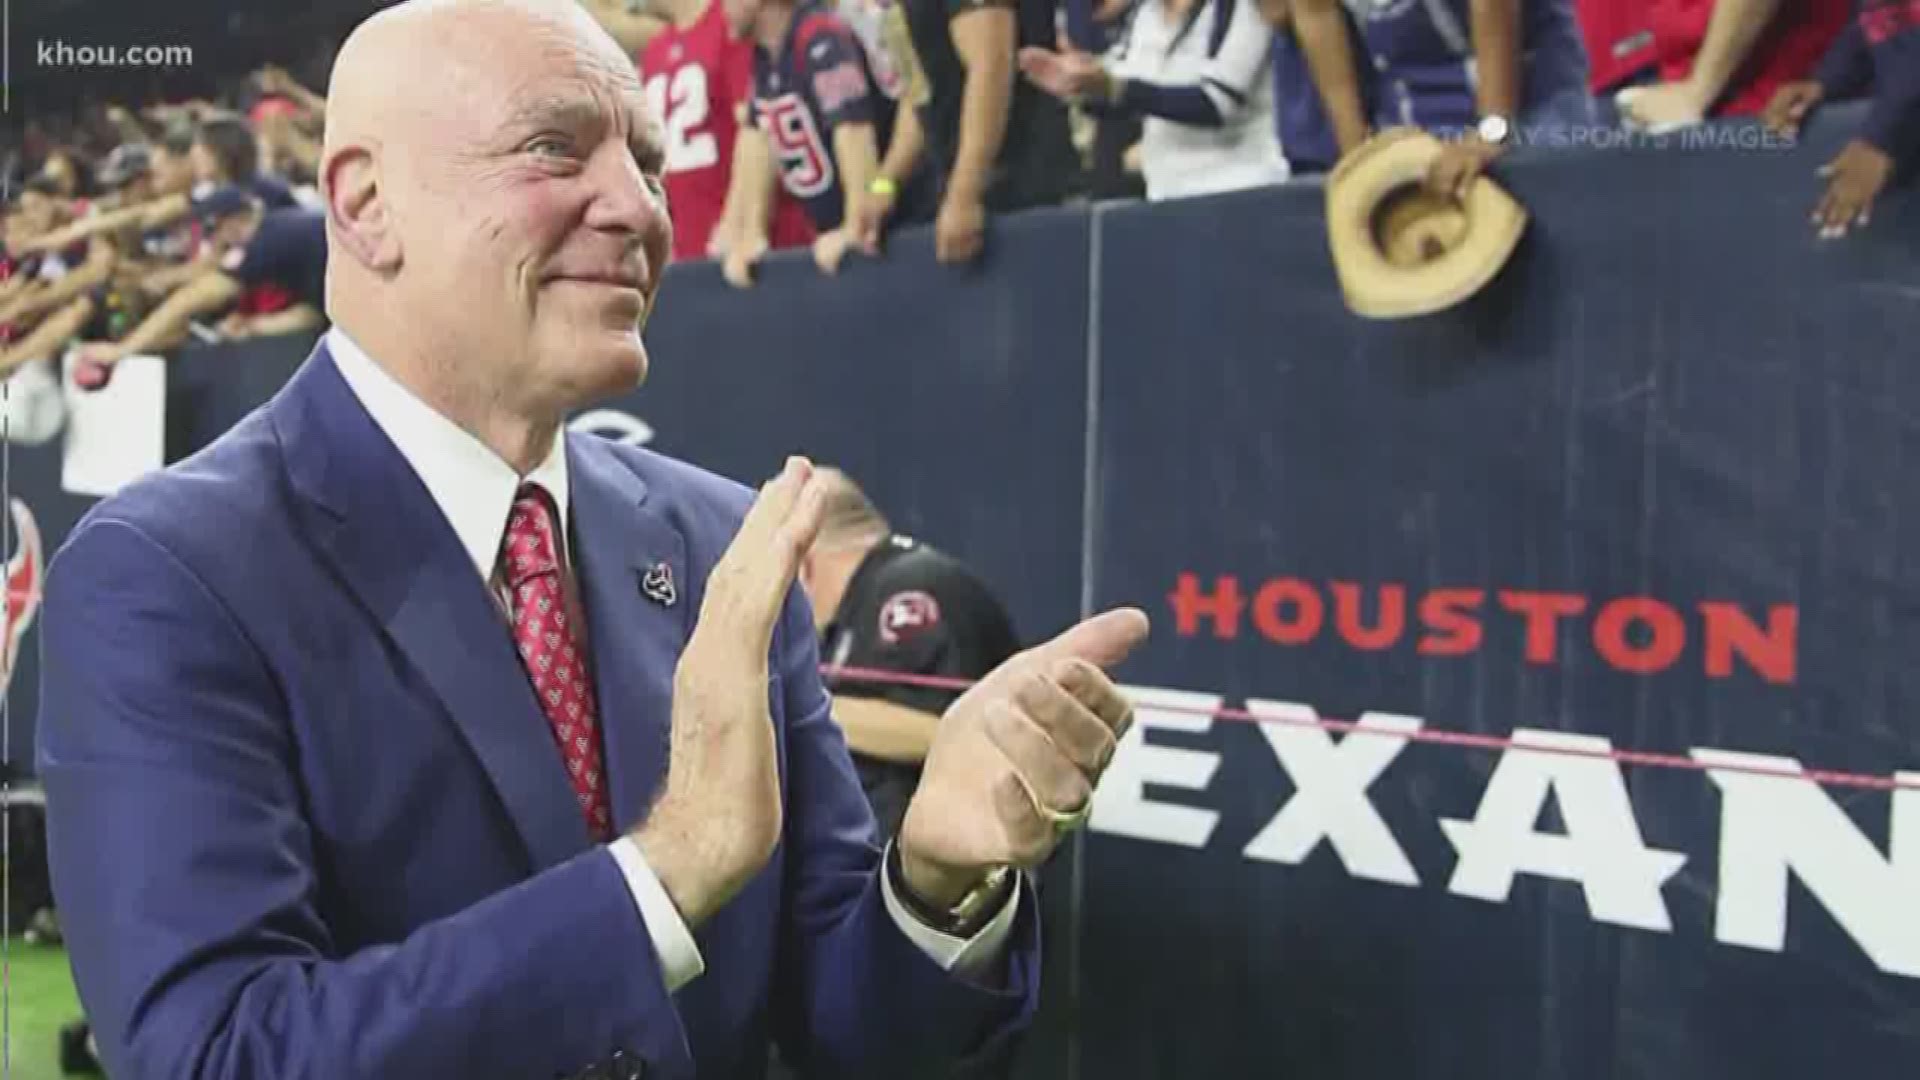 The city of Houston mourns the death of Bob McNair. He brought football back to Houston and became one of the most powerful owners in the NFL.